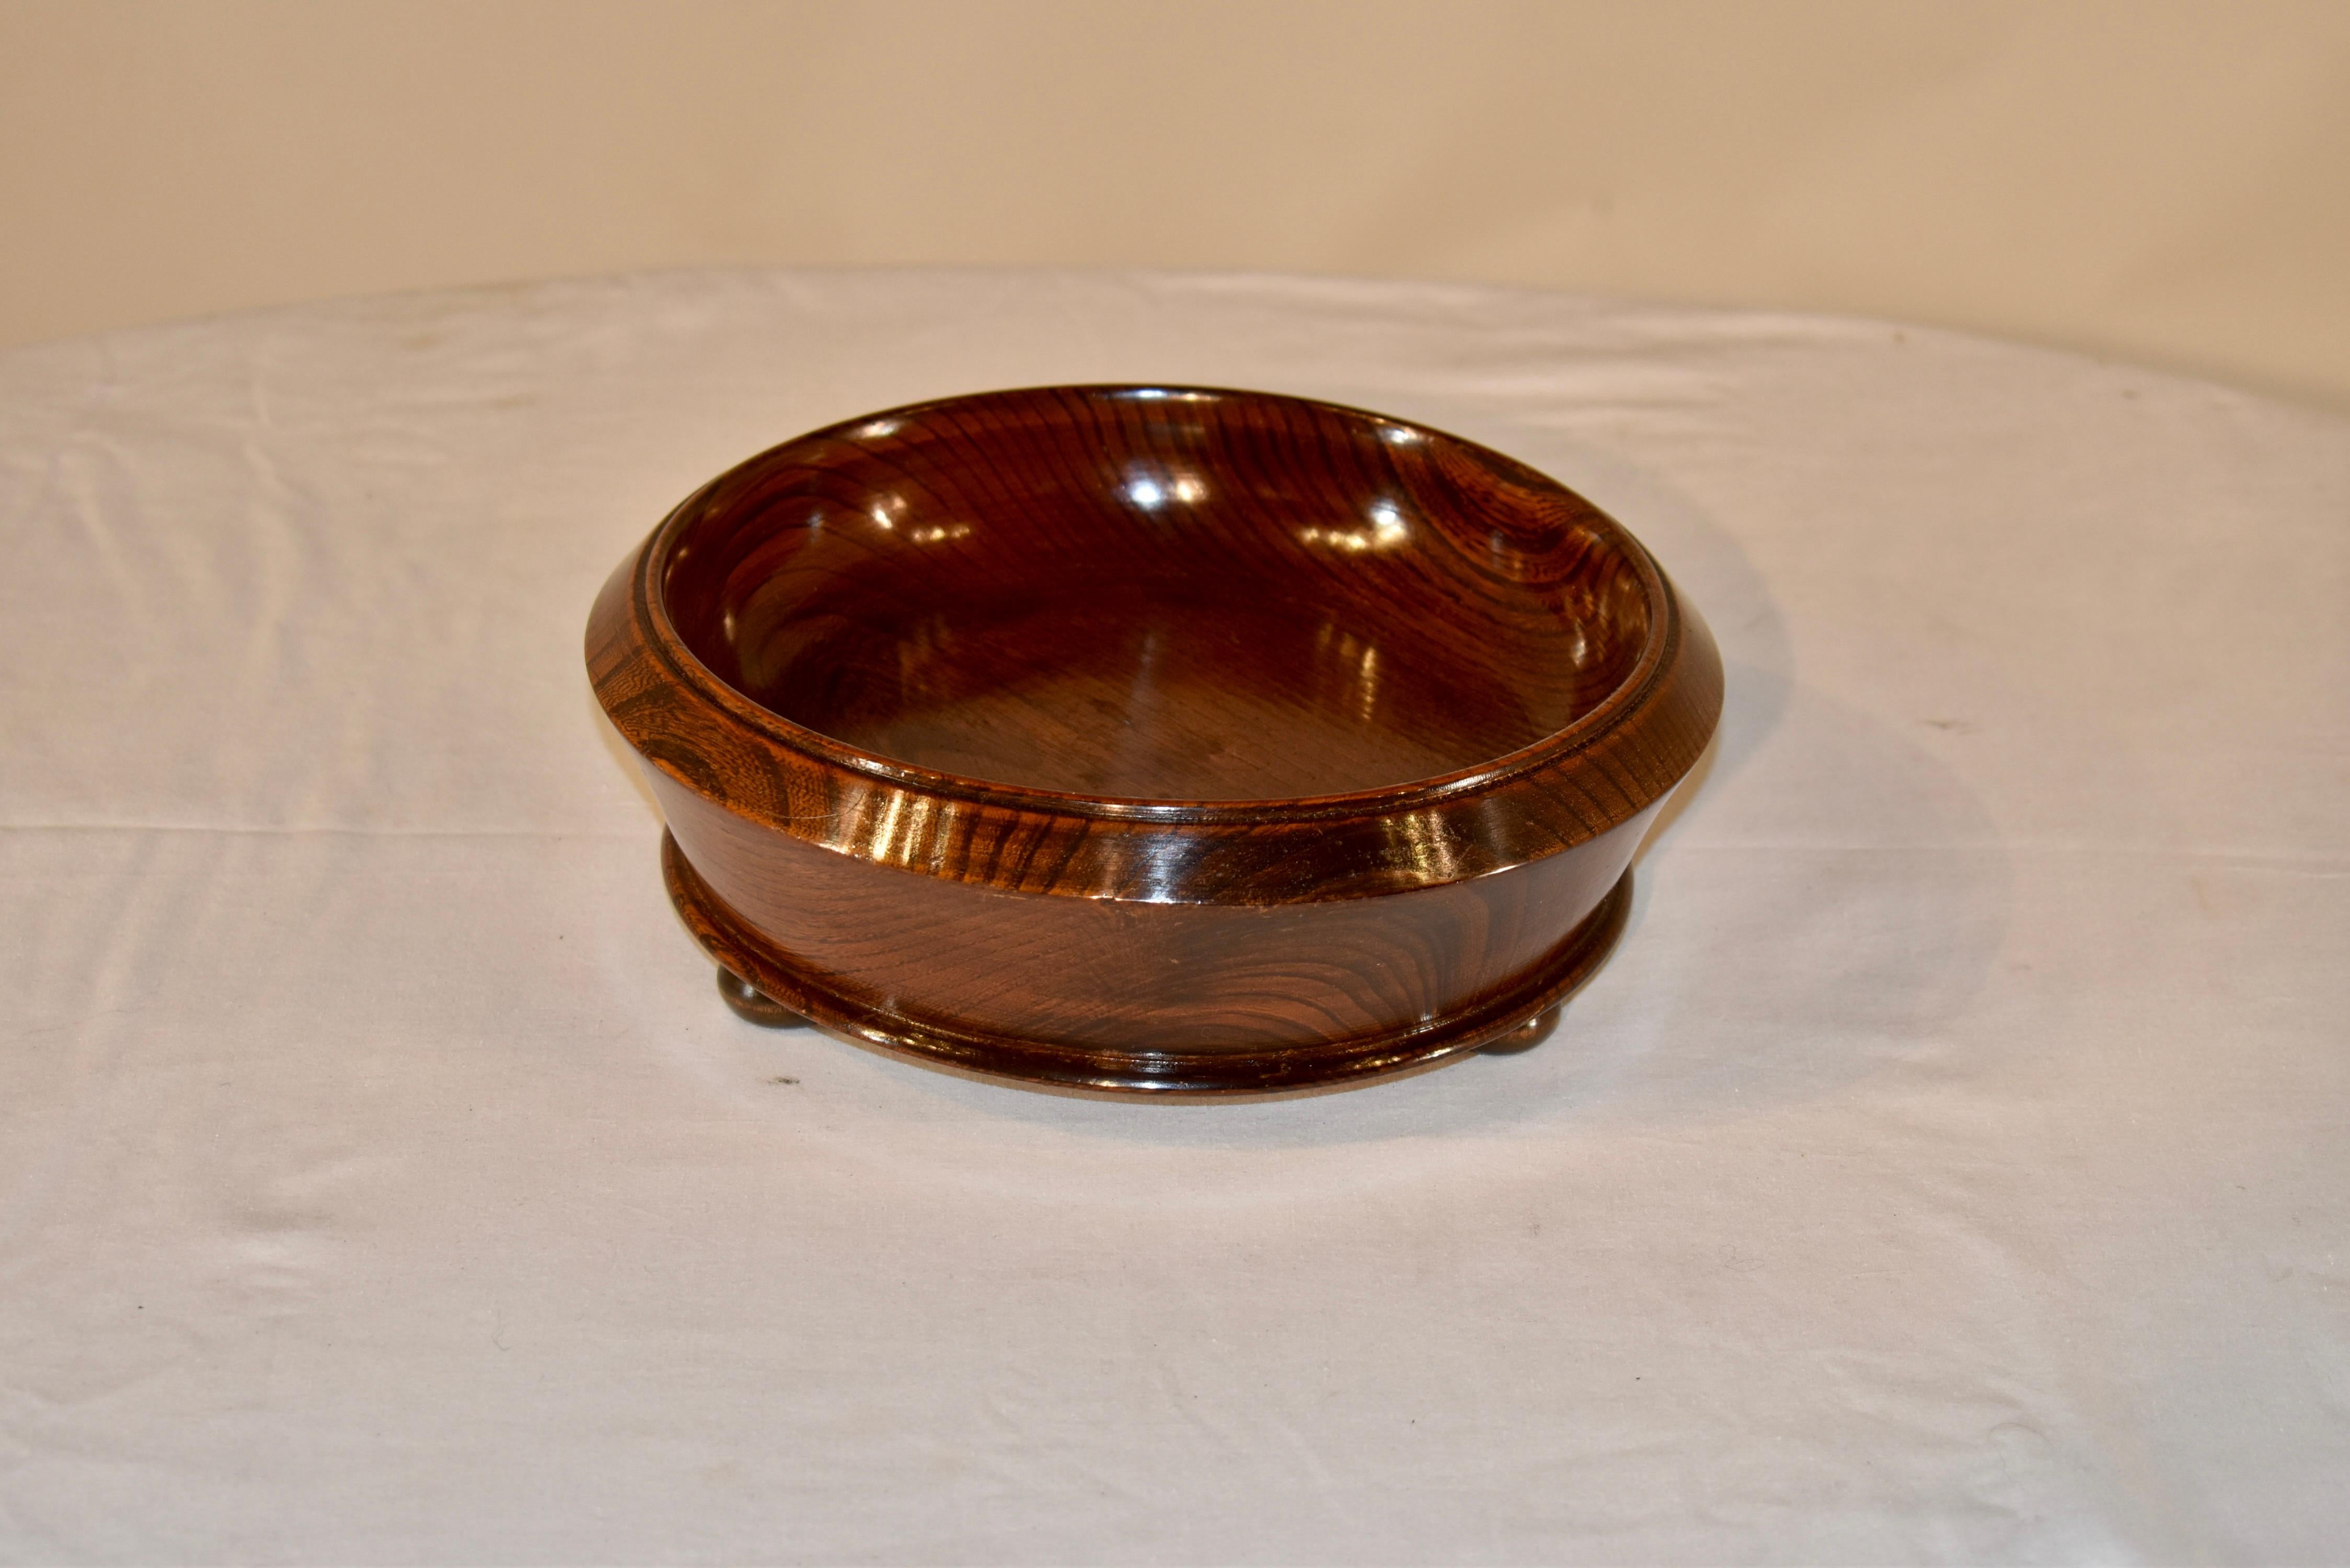 Period Edwardian oak bowl, circa 1900.  The bowl is hand turned  and is supported on hand turned feet.  Lovely color and groaning throughout.